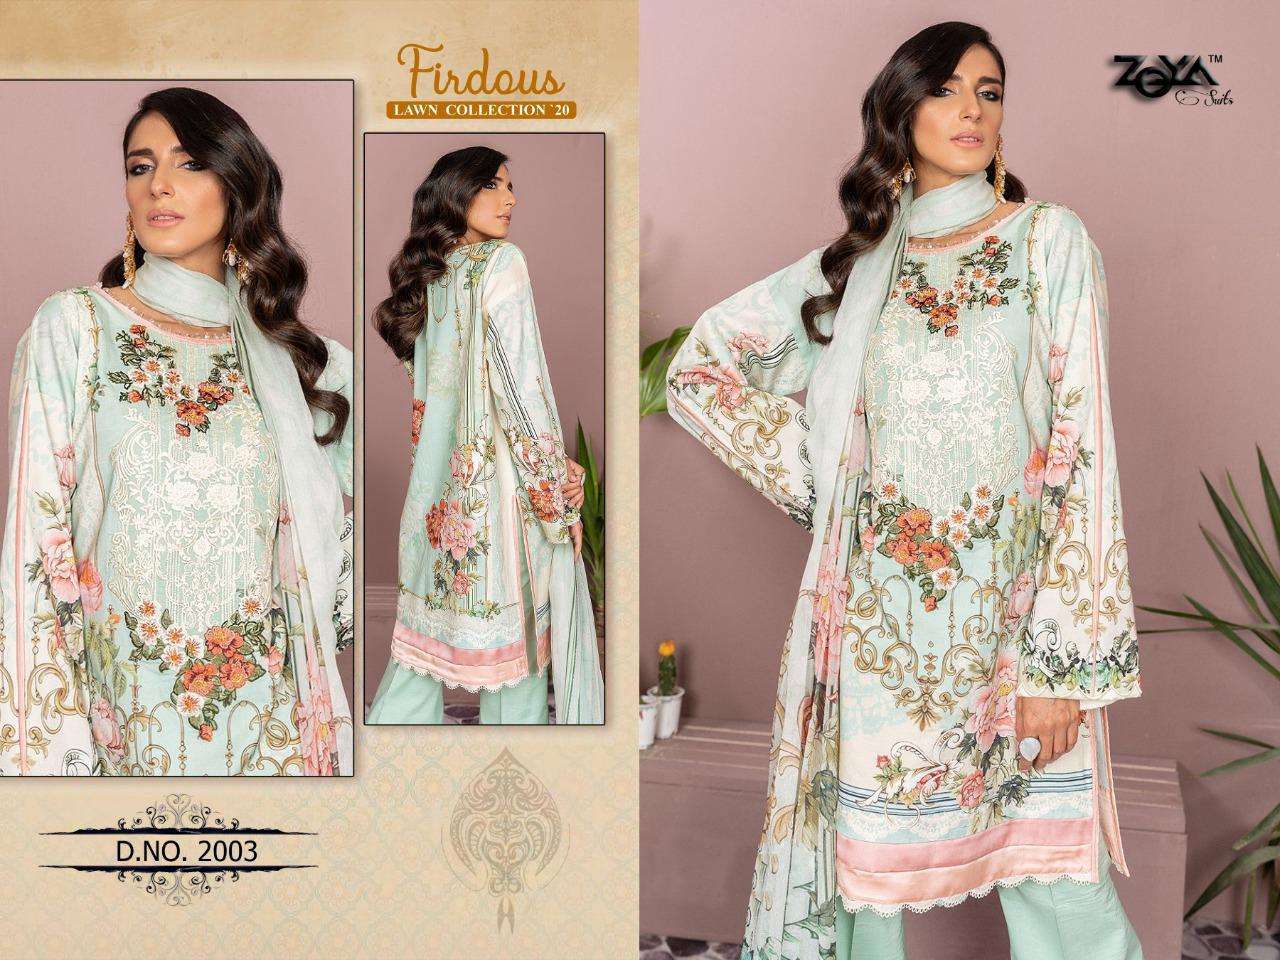 FIRDOUD LAWN COLLECTION 20 BY ZOYA SUITS 2001 TO 2005 SERIES PAKISTANI SUITS BEAUTIFUL FANCY COLORFUL STYLISH PARTY WEAR & OCCASIONAL WEAR JAM COTTON PRINTED WITH EMBROIDERY DRESSES AT WHOLESALE PRICE